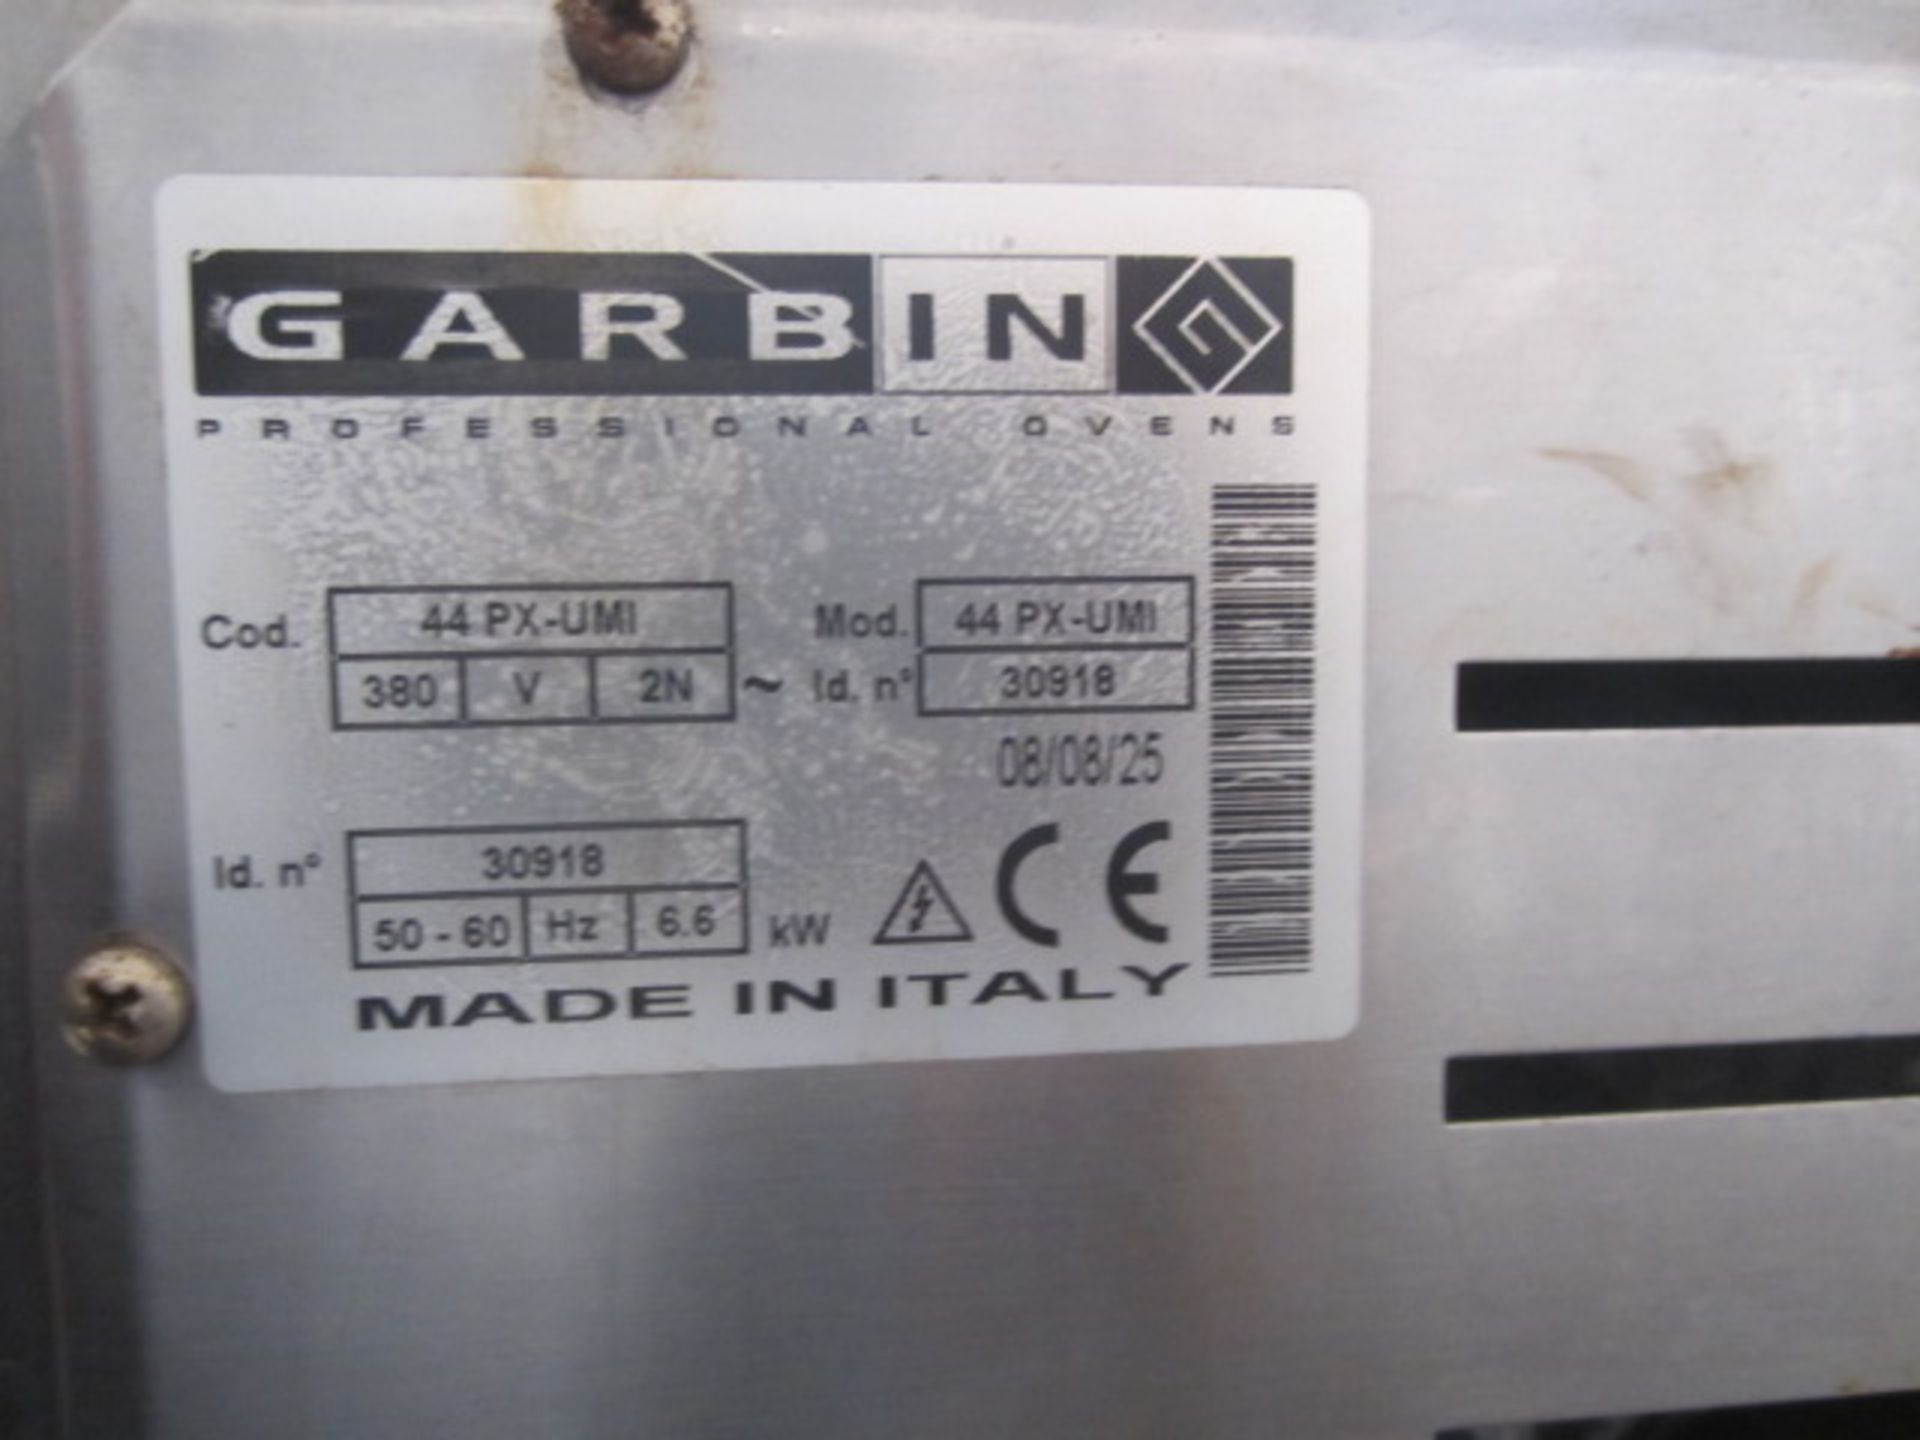 Garbin stainless steel glass fronted oven, model 44-PX-UMI, serial no. 30918, 3 phase (2008), with - Image 5 of 5